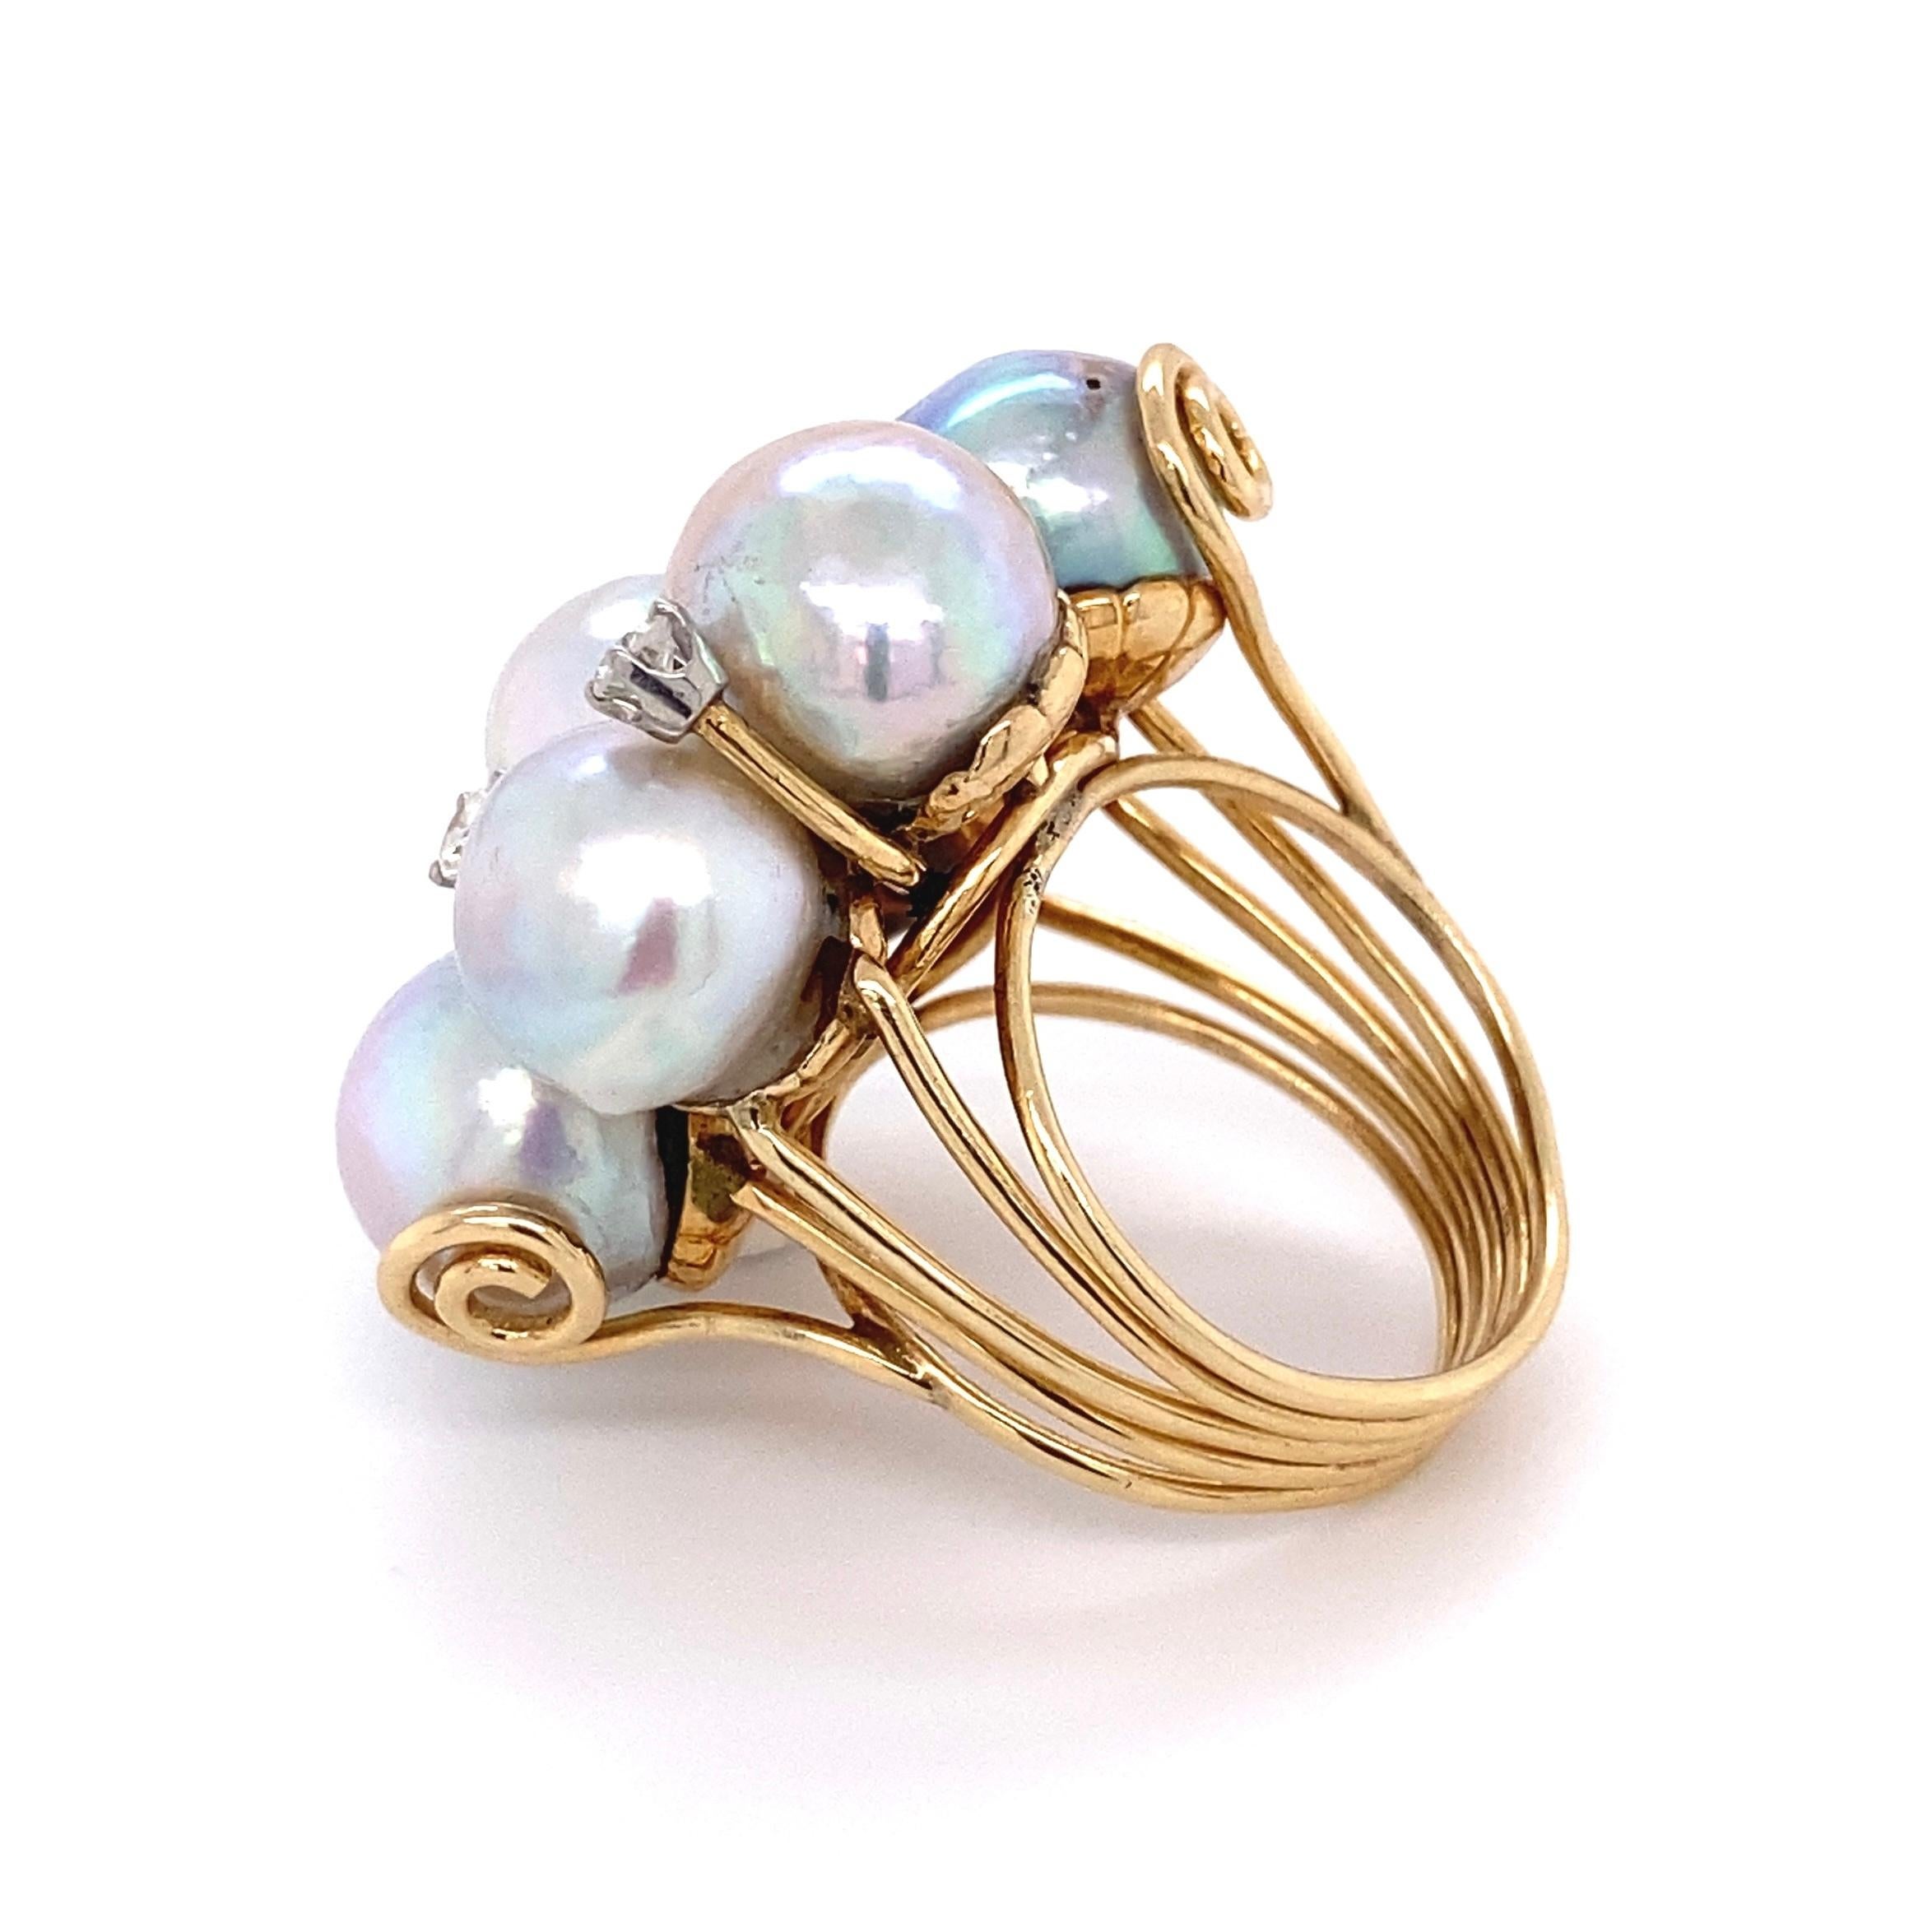 Women's Pearls and Diamonds Modernist Gold Cocktail Cluster Ring Estate Fine Jewelry